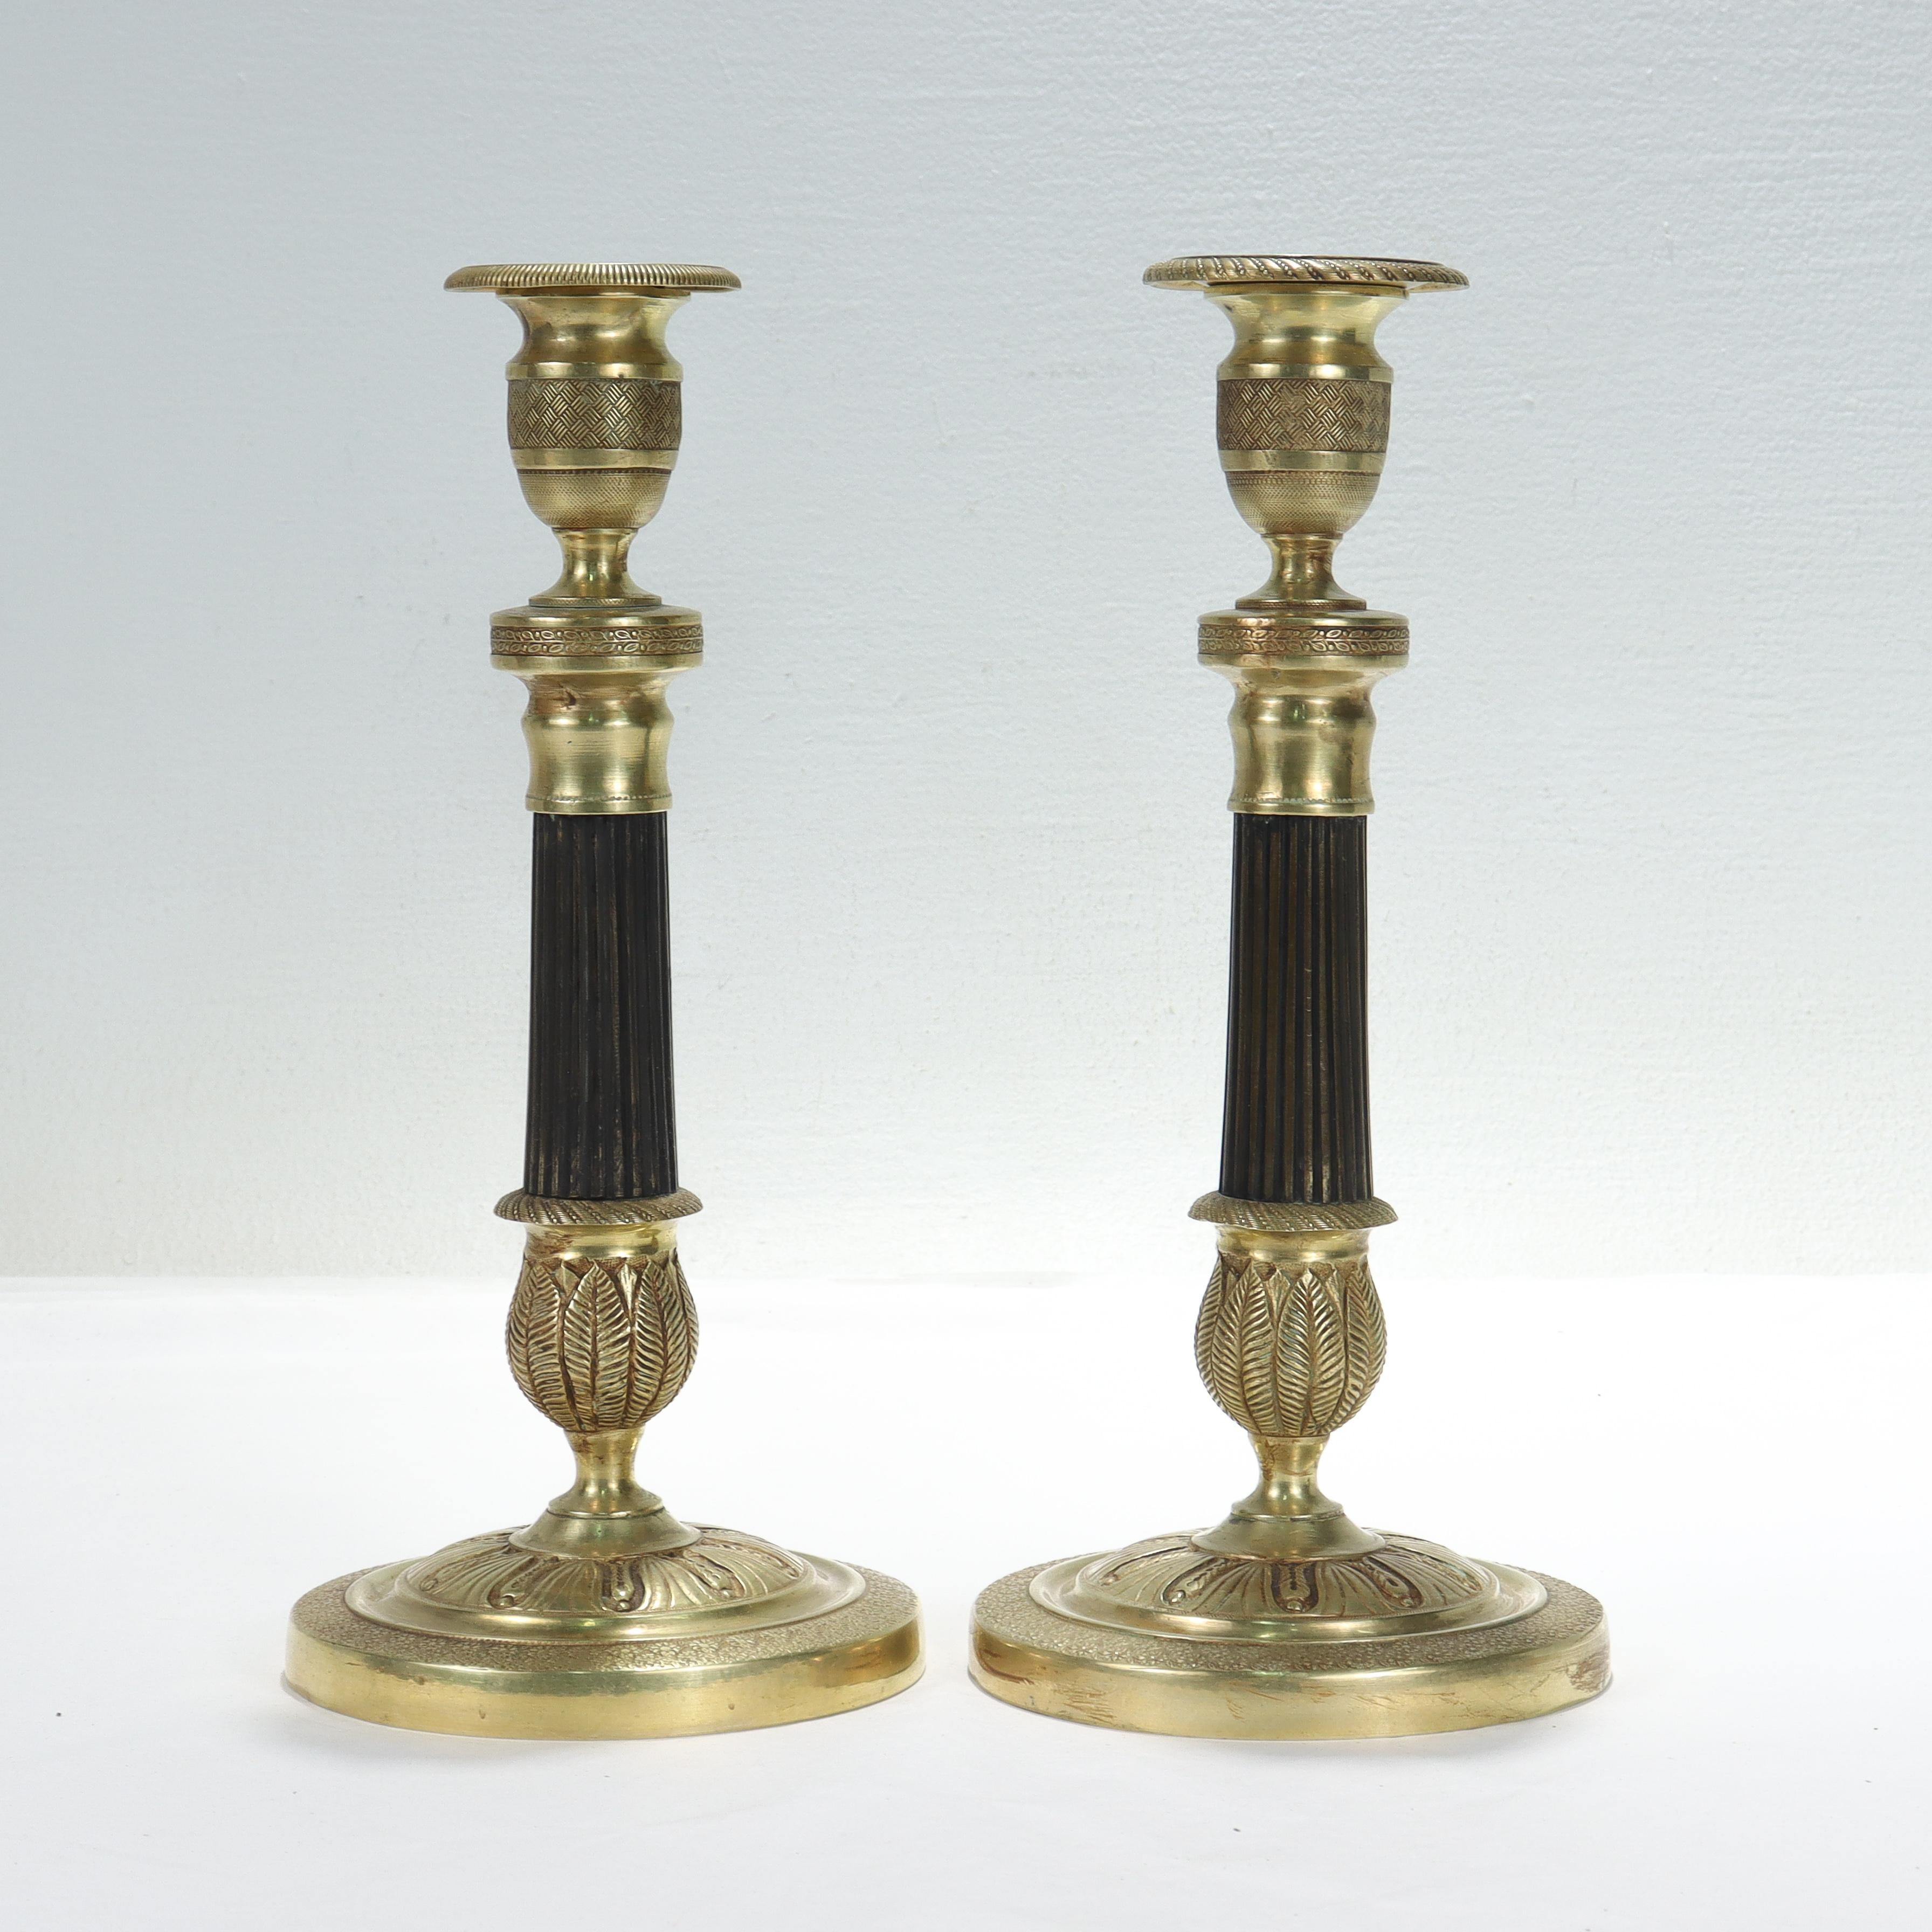 A fine pair of French Empire gilt bronze candlesticks.

With intricate raised decoration in the form of geometric and foliate patterns.

The middle of each candlestick is fluted and has a warm brown patina.

The bobeches are removable and the